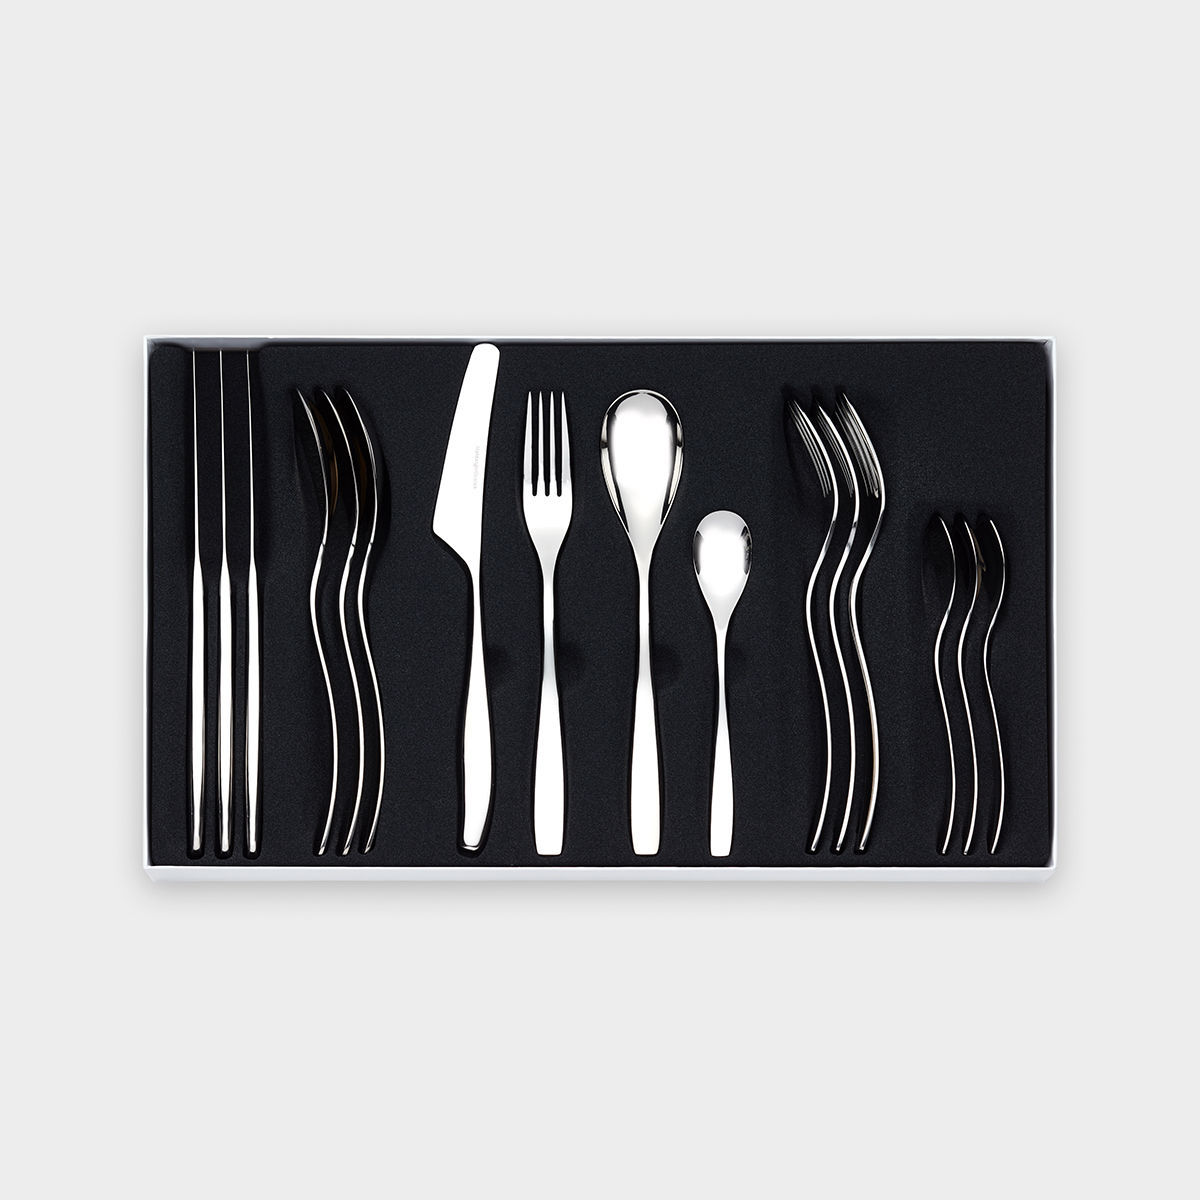 Julie cutlery set 16 pieces product image